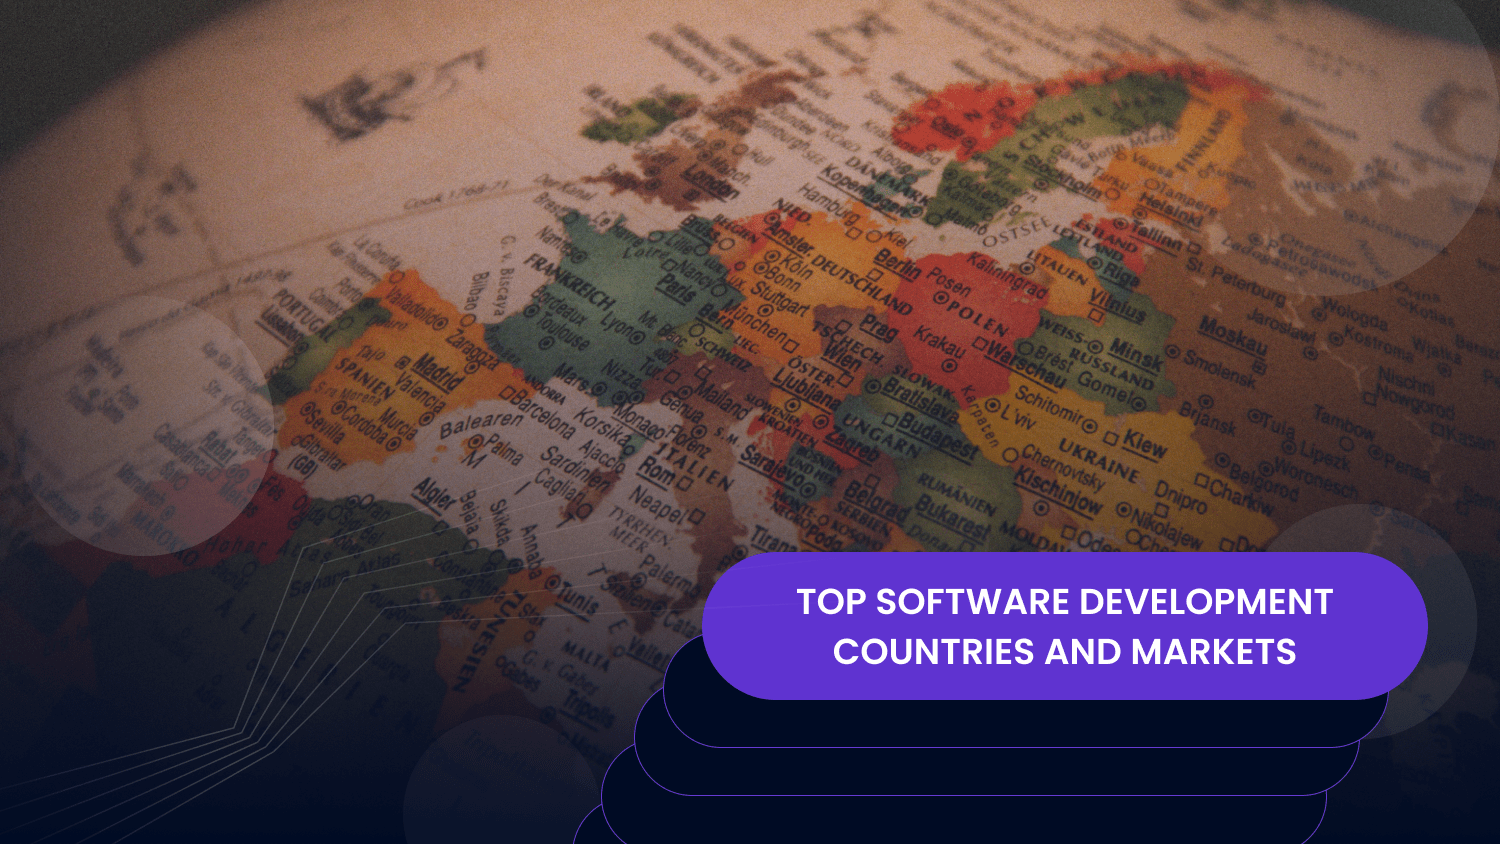 Top software development countries and markets